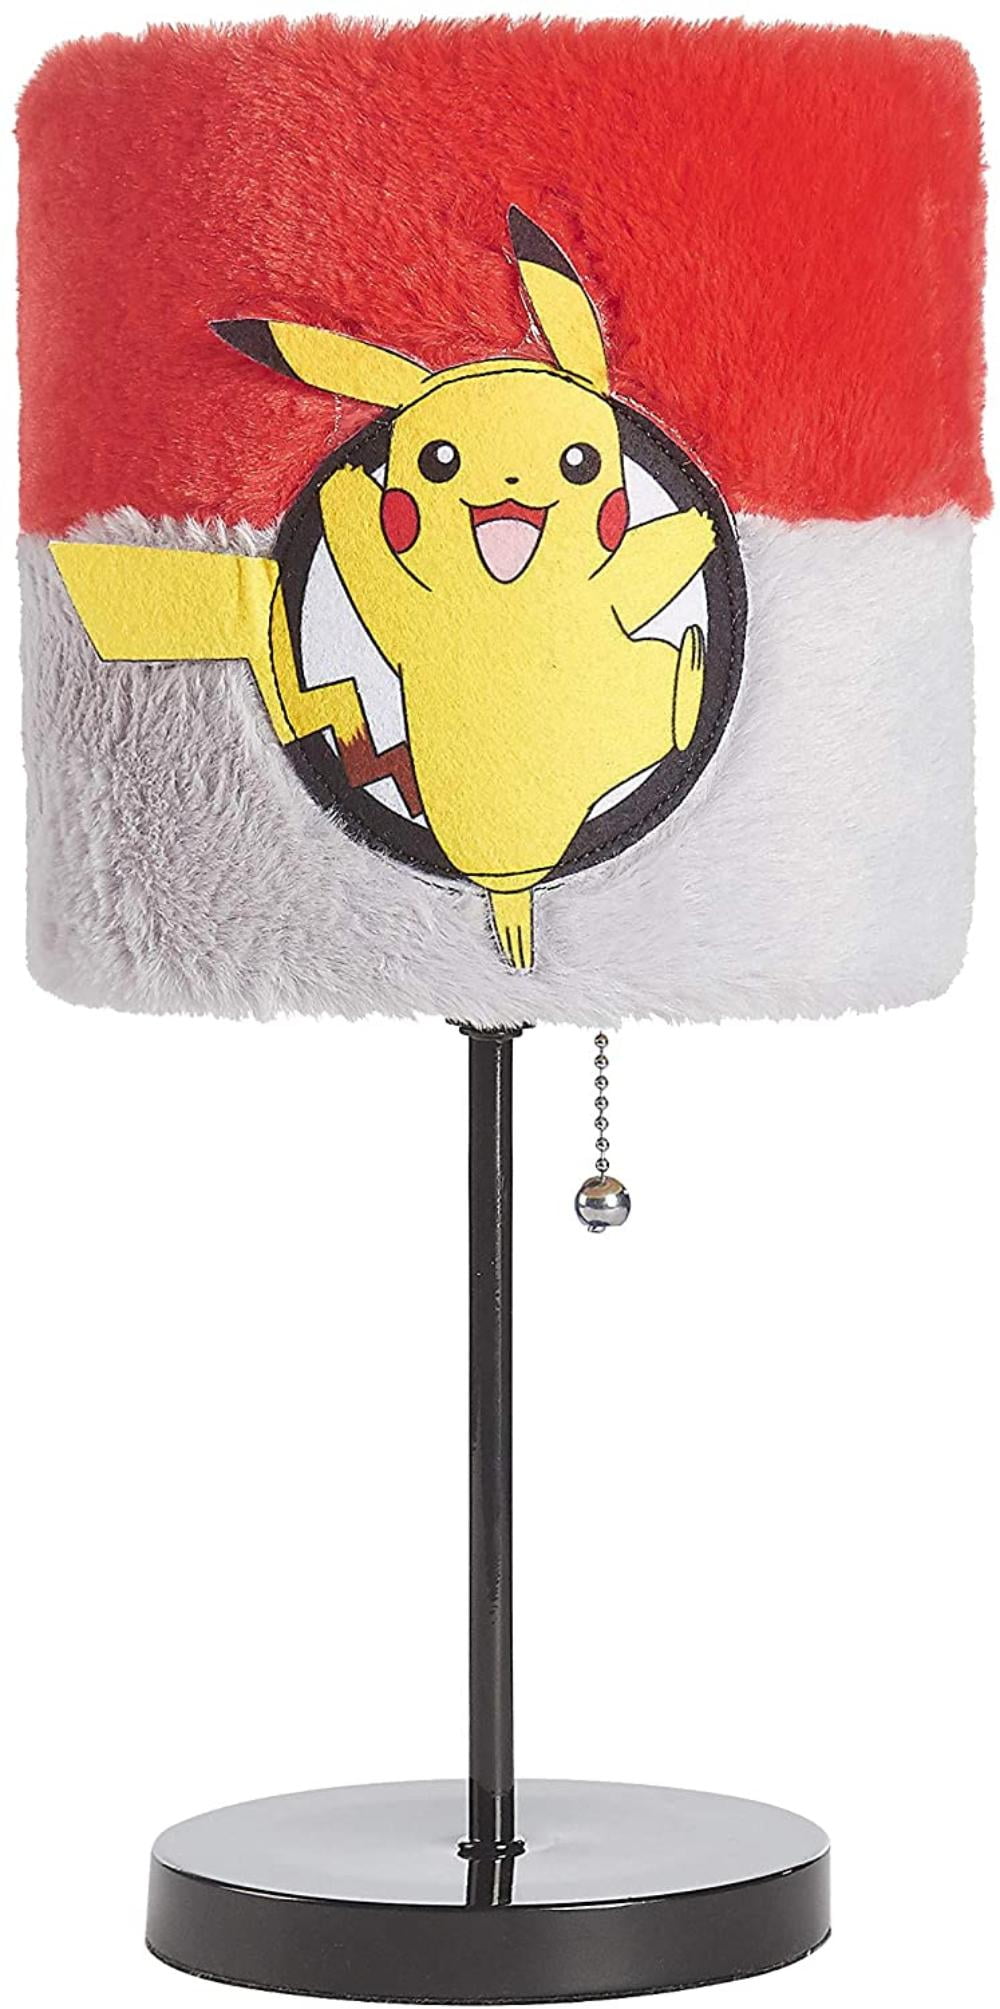 Pikachu Pokemon Lampshades Ceiling Light Table Lamp To Match Bedding Curtains 